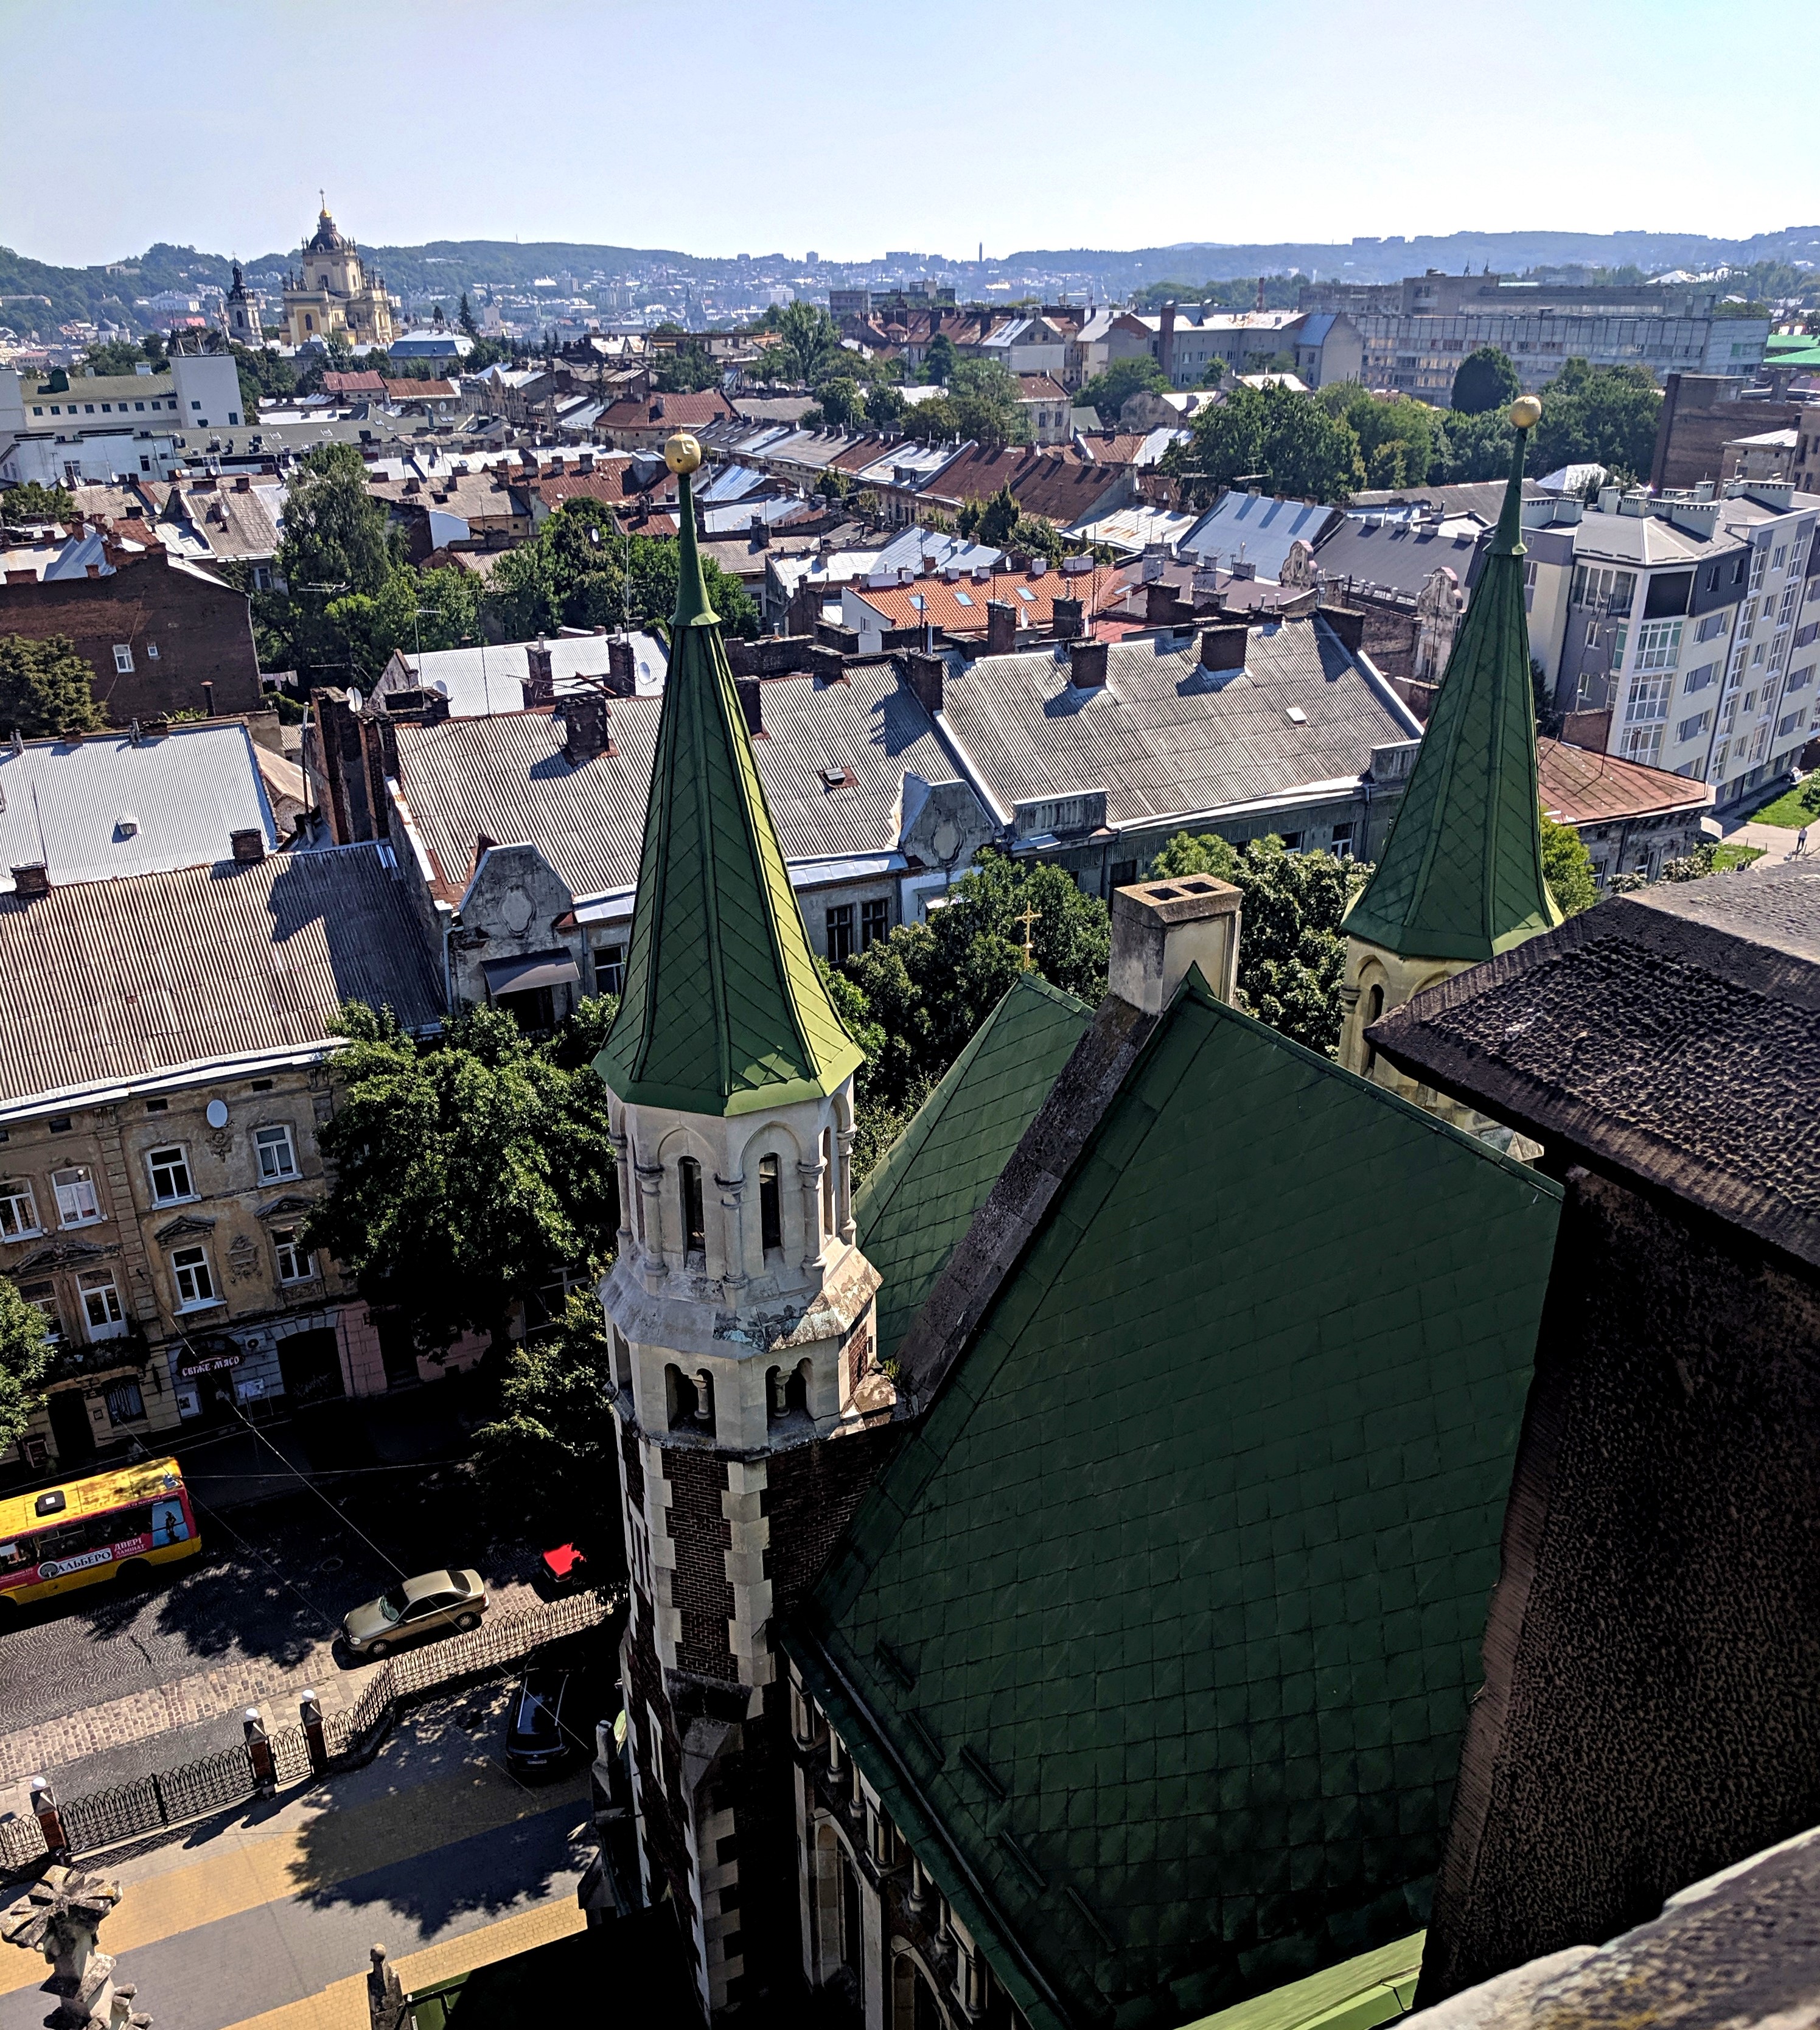 the view from the church tower